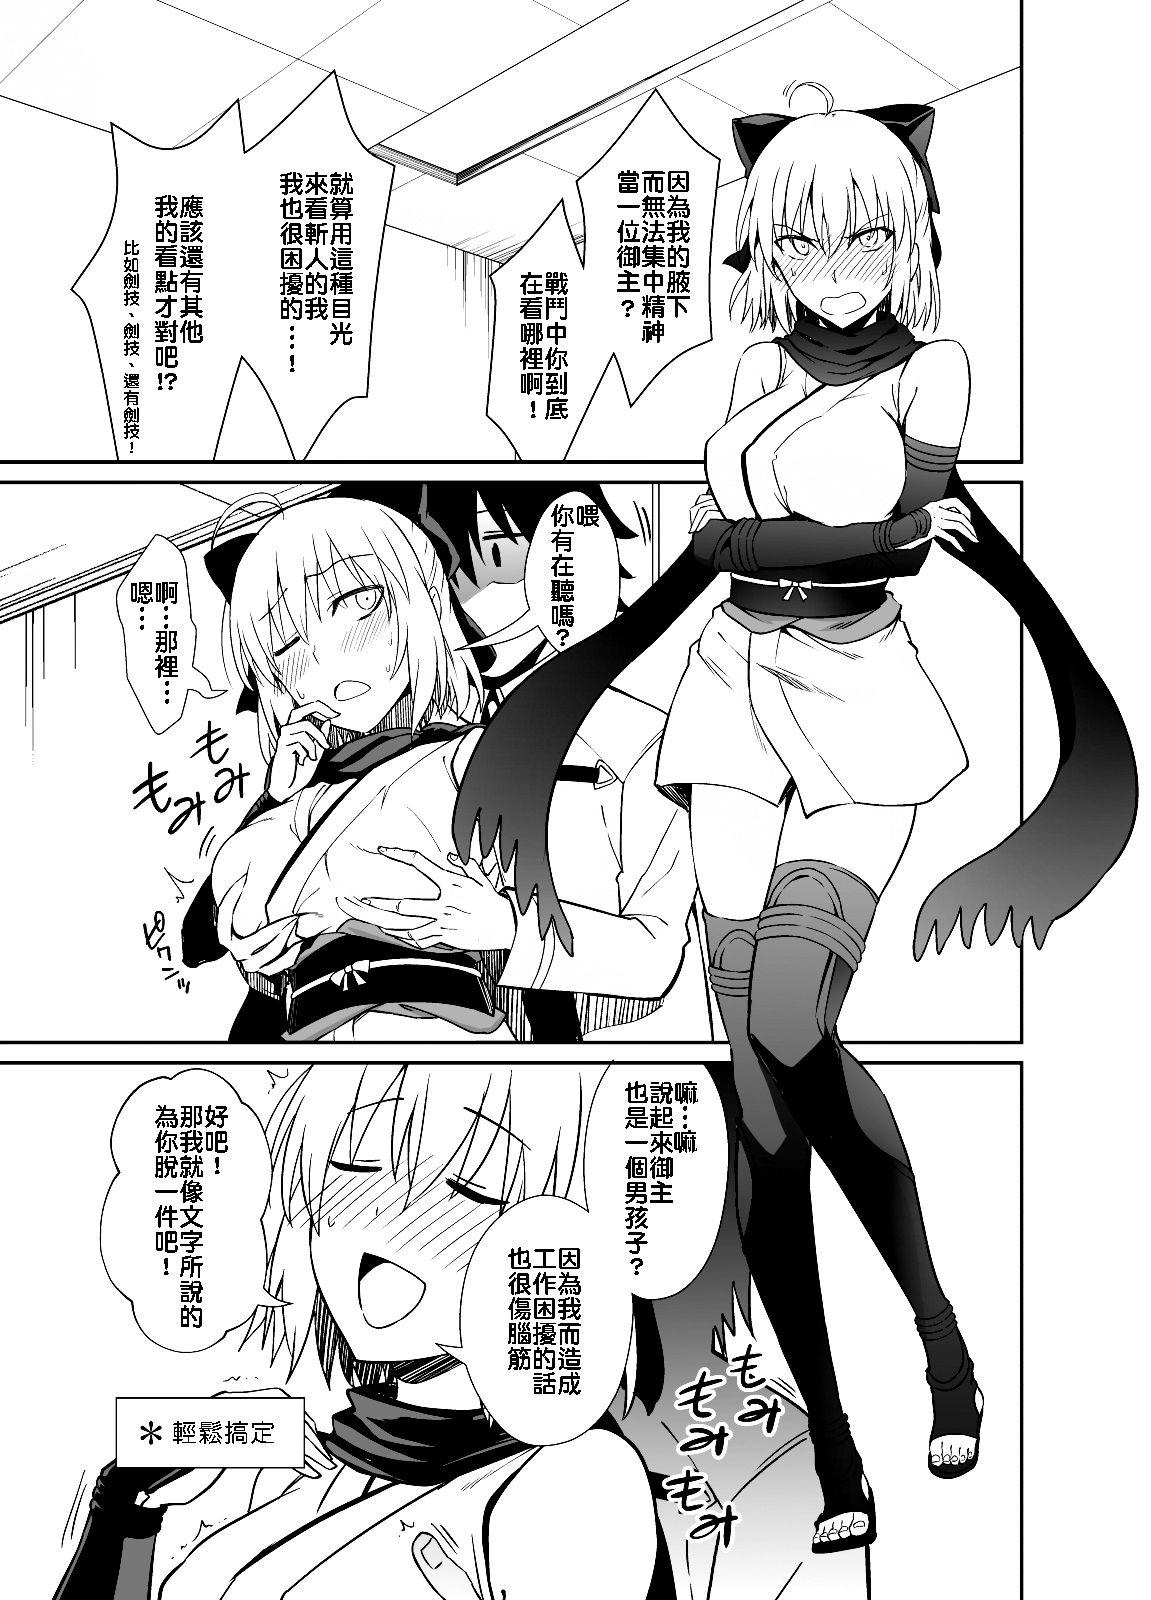 Collar Okita-san to Sex - Fate grand order Gay Straight - Page 3